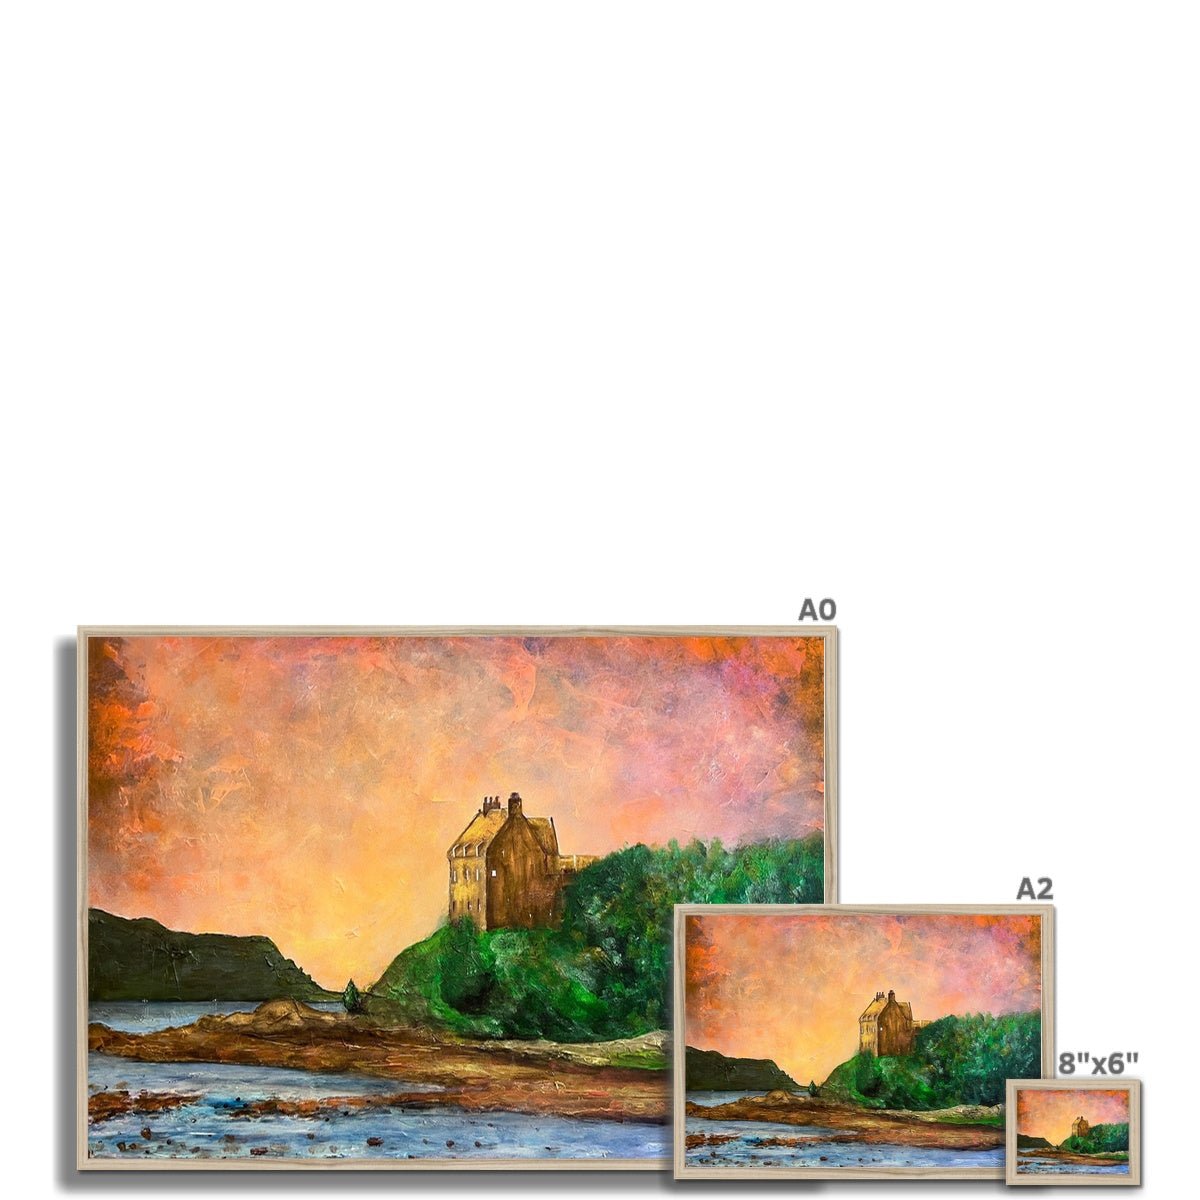 Duntrune Castle Painting | Framed Prints From Scotland-Framed Prints-Historic & Iconic Scotland Art Gallery-Paintings, Prints, Homeware, Art Gifts From Scotland By Scottish Artist Kevin Hunter